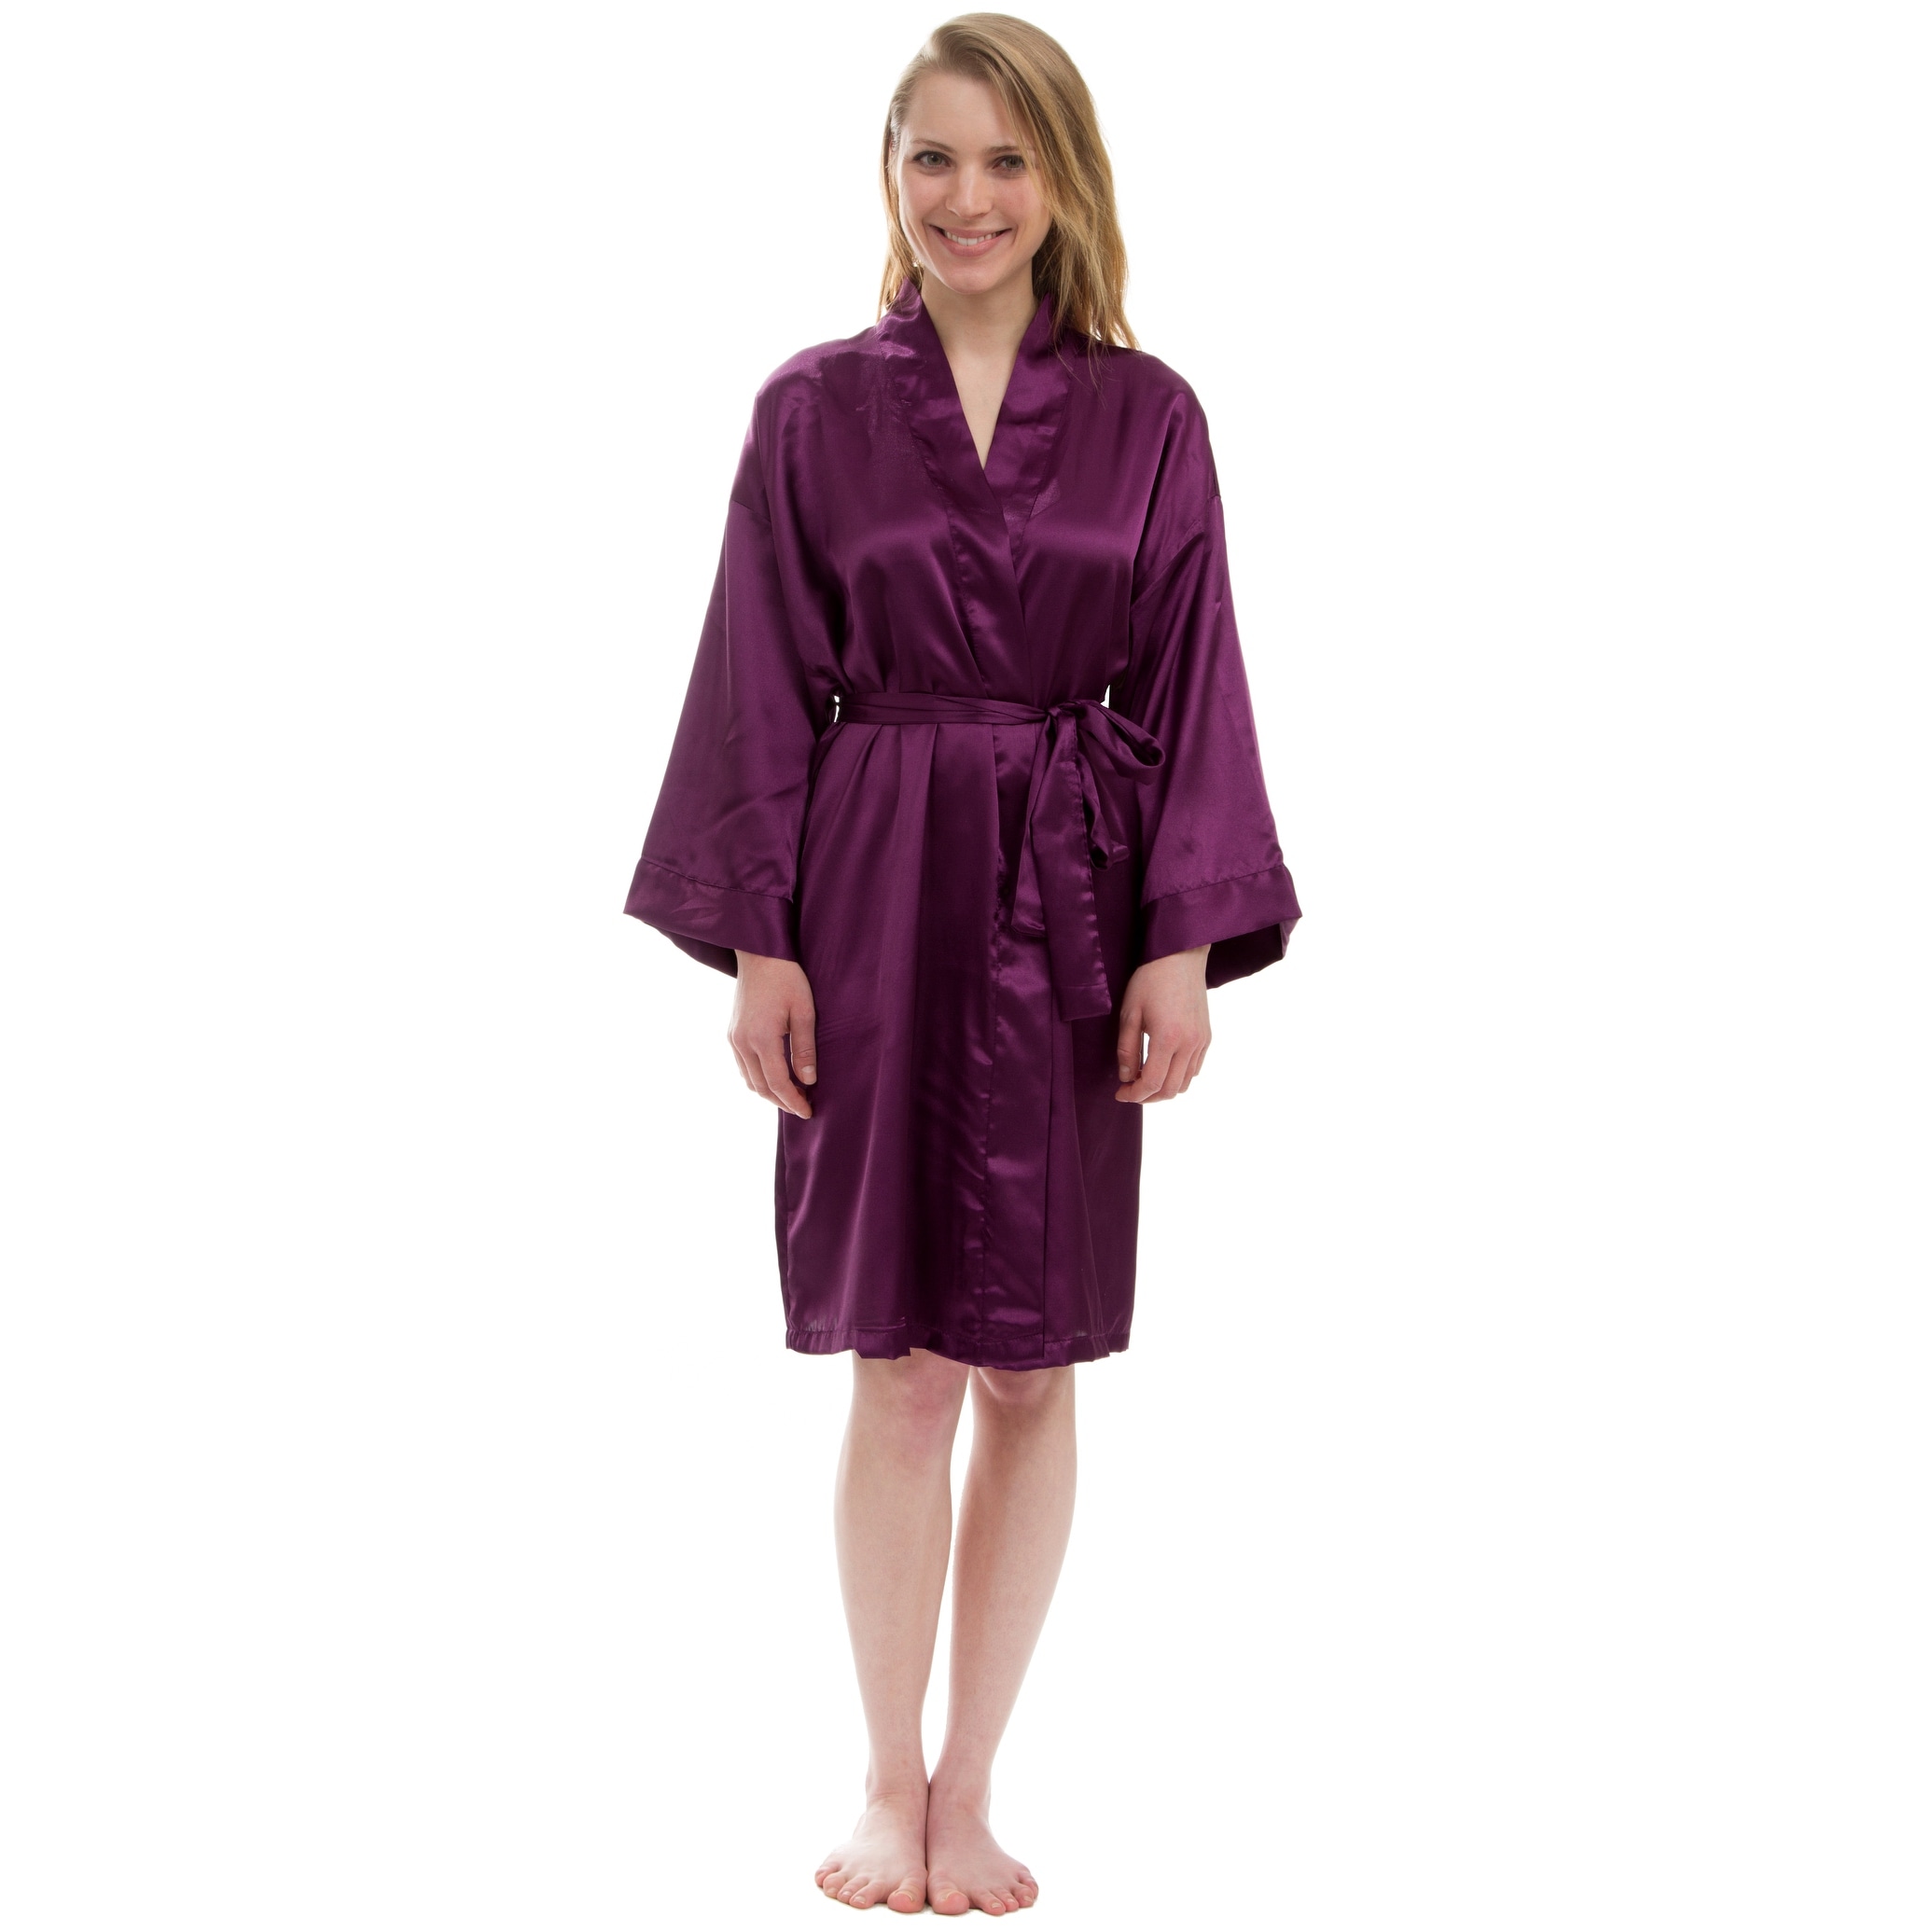 https://ak1.ostkcdn.com/images/products/is/images/direct/0a2b45d5a1f3d2ffde8ec29da70006581cd74adc/Women%27s-Silky-Satin-Robe.jpg